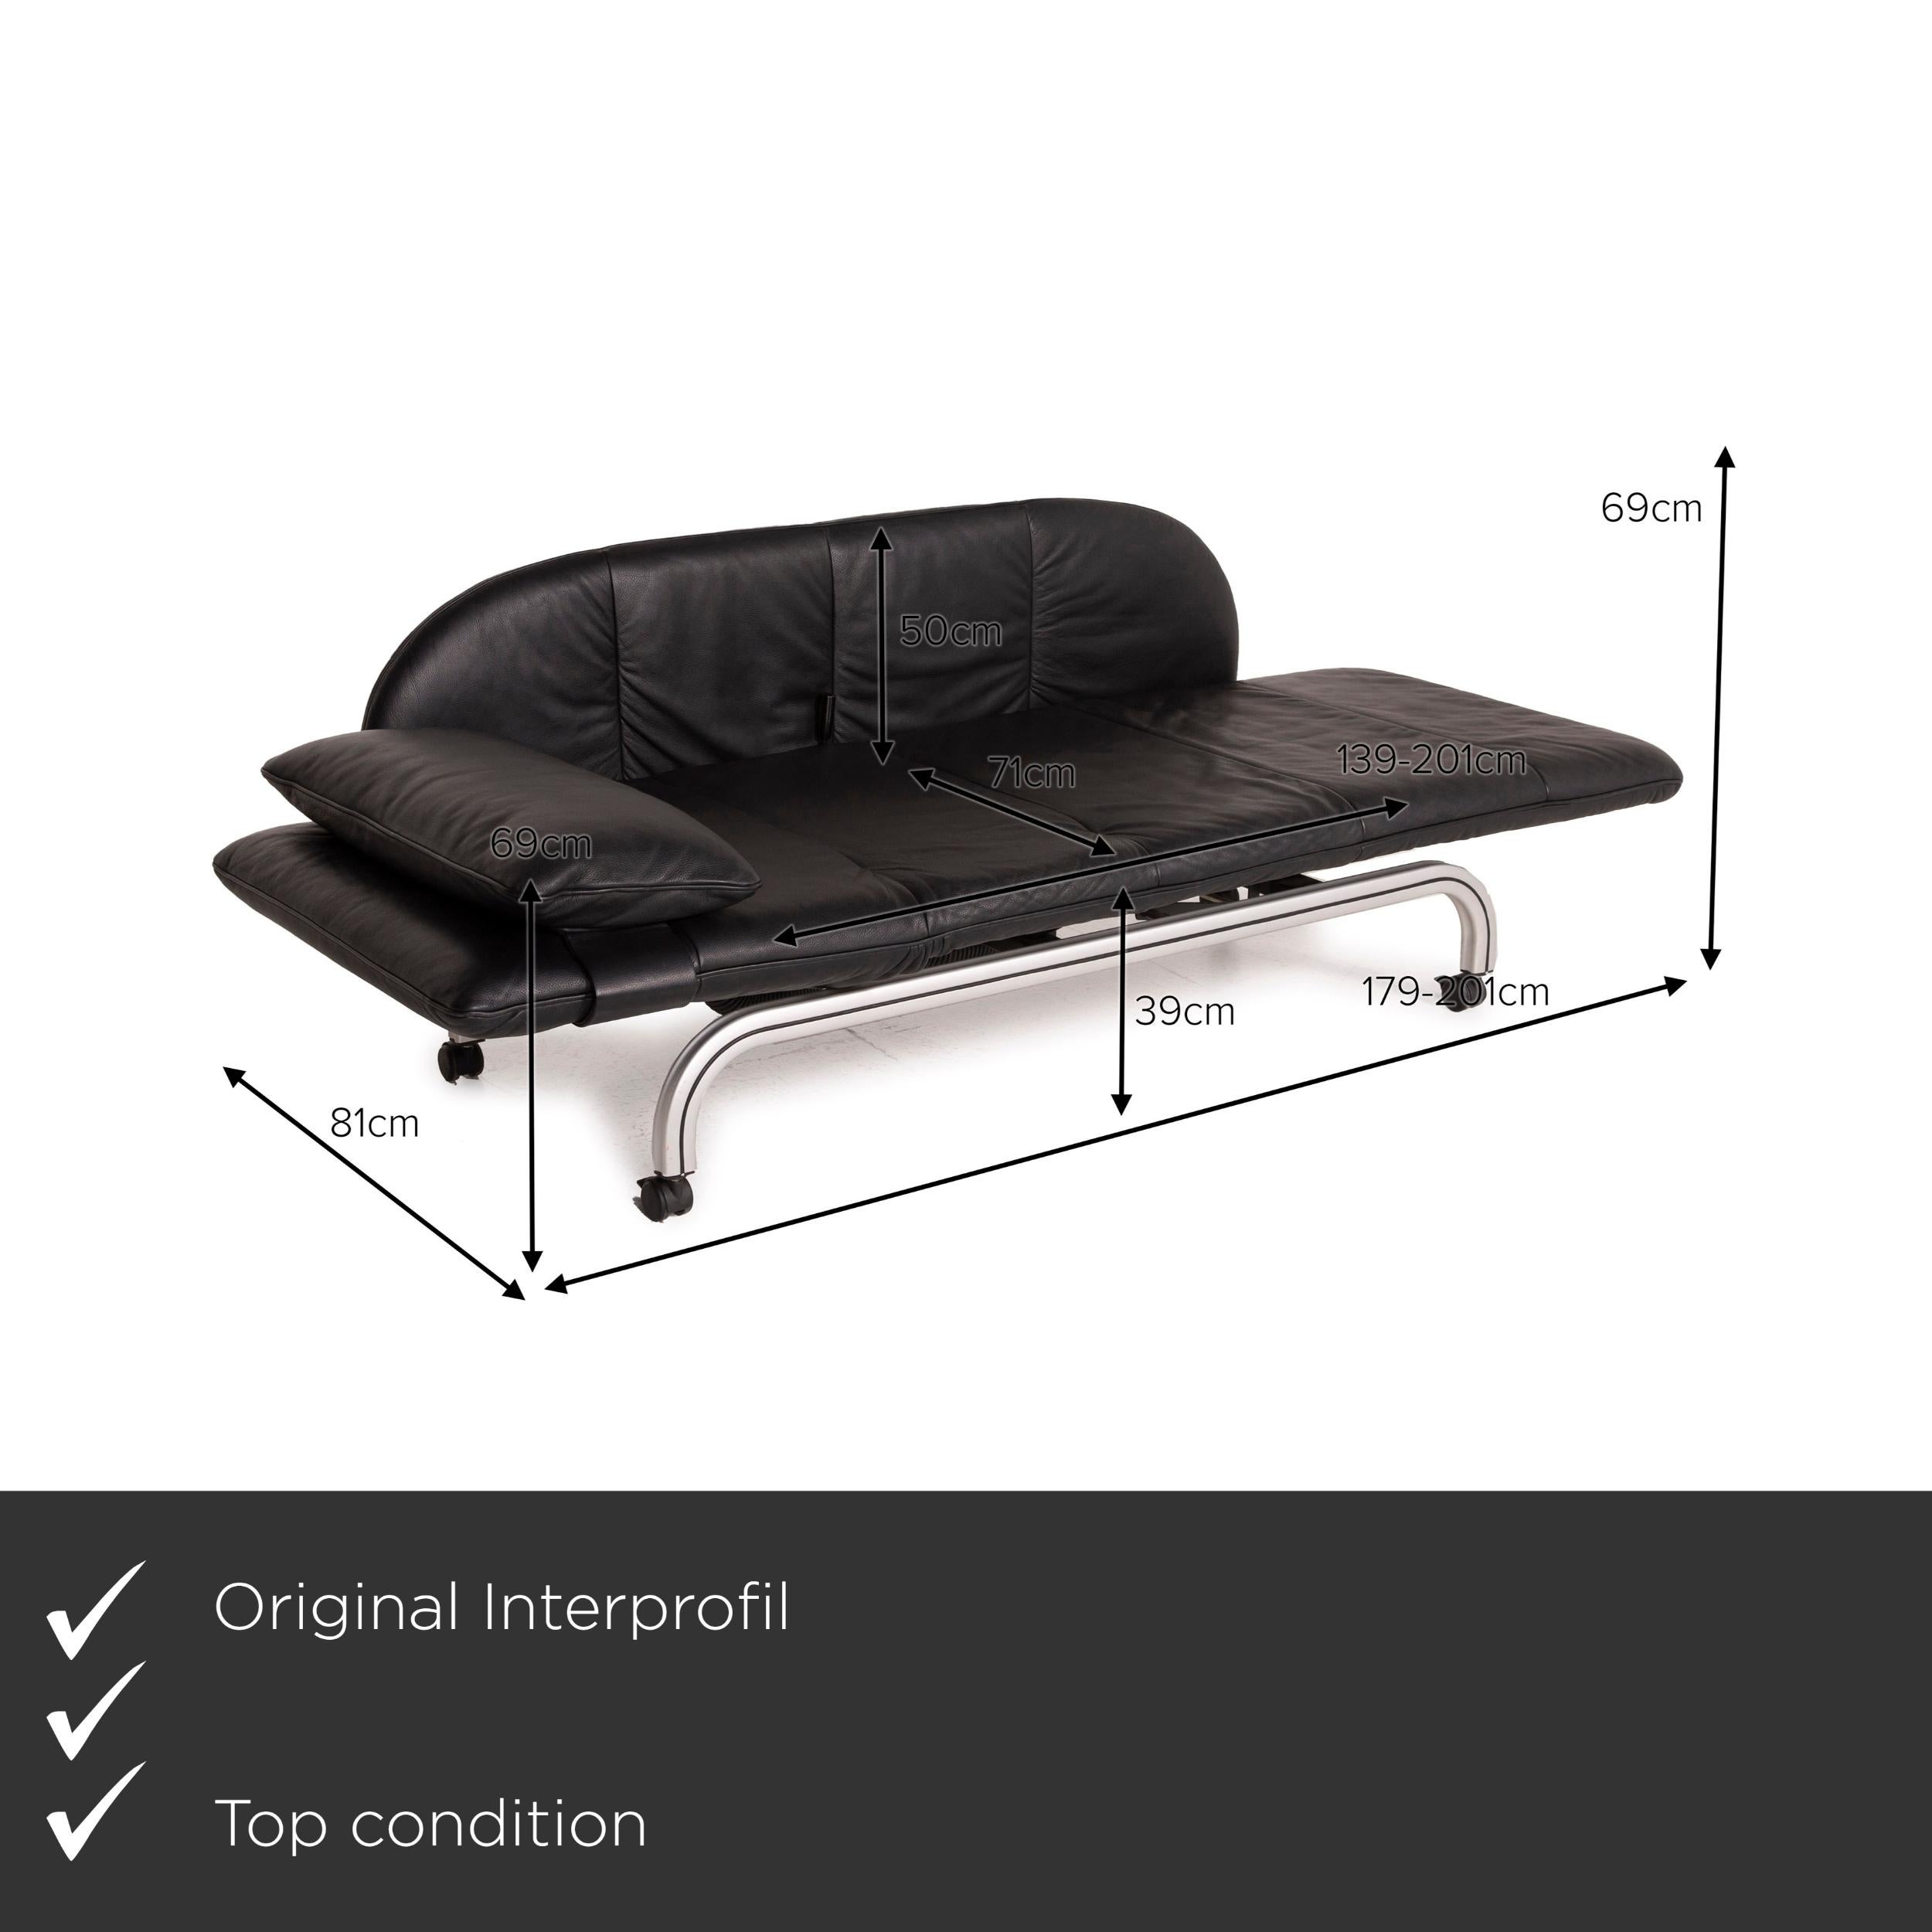 We present to you an Interprofil Beo leather lounger black function two-seater.
 
 

 Product measurements in centimeters:
 

Depth: 81
Width: 179
Height: 69
Seat height: 39
Rest height: 69
Seat depth: 71
Seat width: 139
Back height: